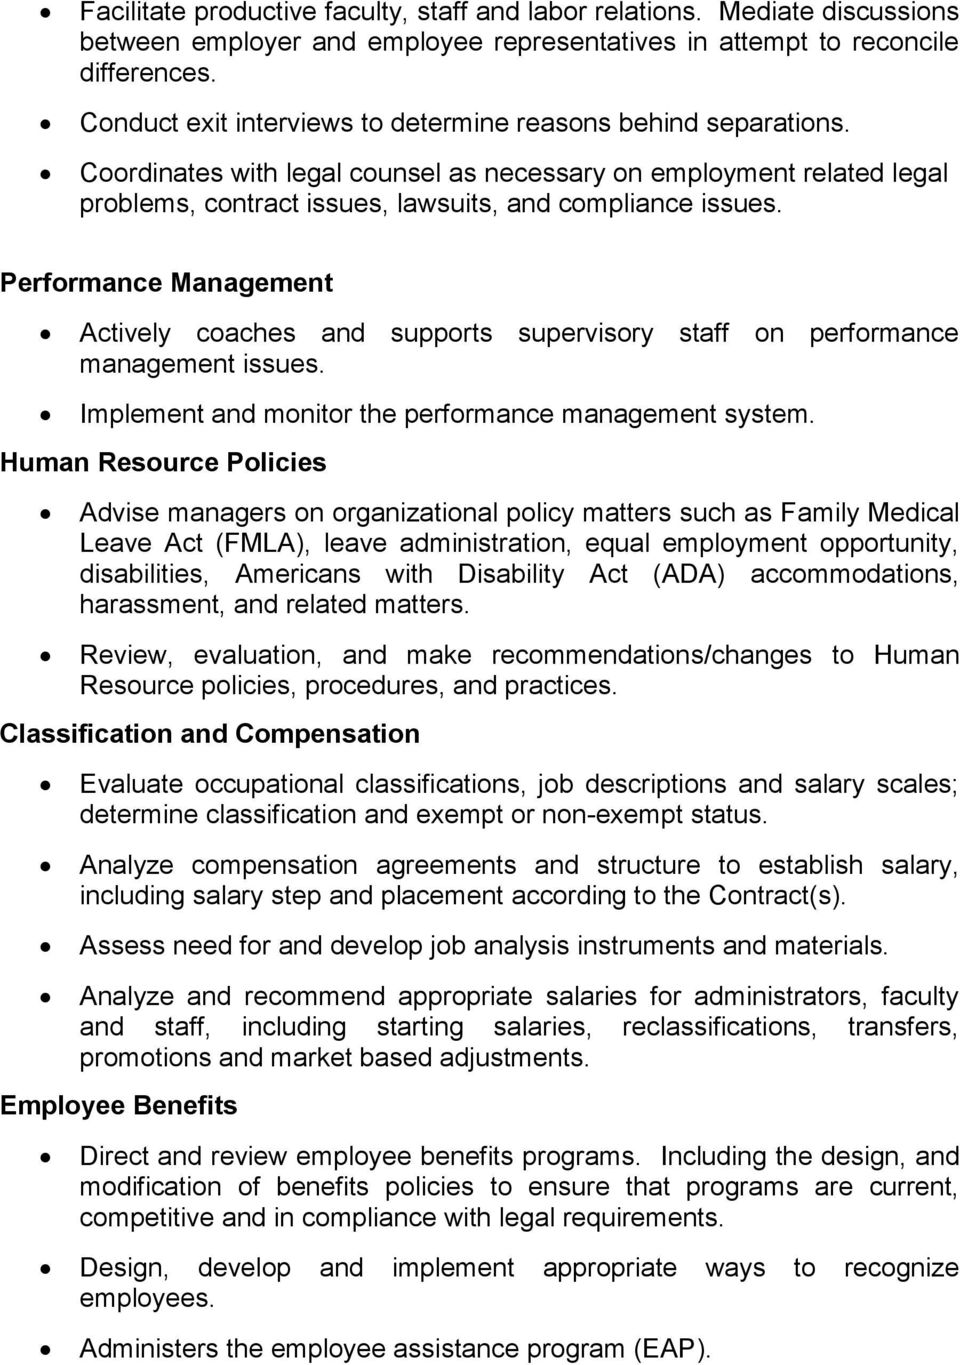 Performance Management Actively coaches and supports supervisory staff on performance management issues. Implement and monitor the performance management system.